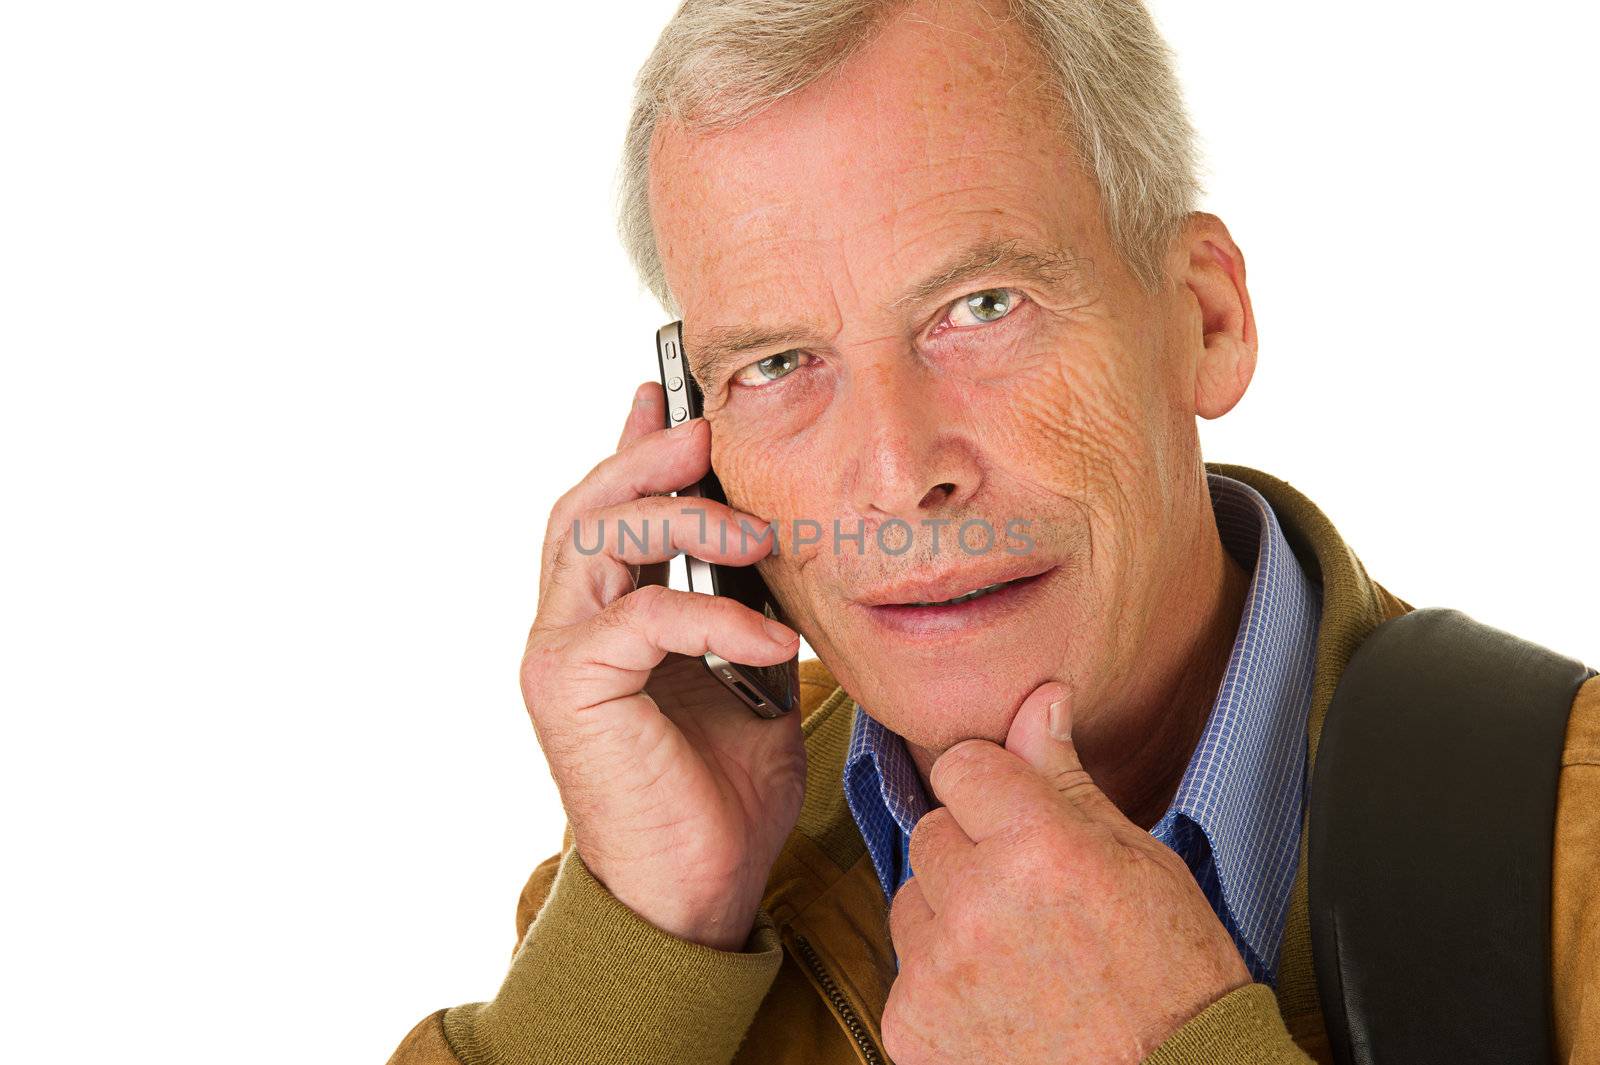 Senior man taking on his smartphone. Smiling. Over a white background